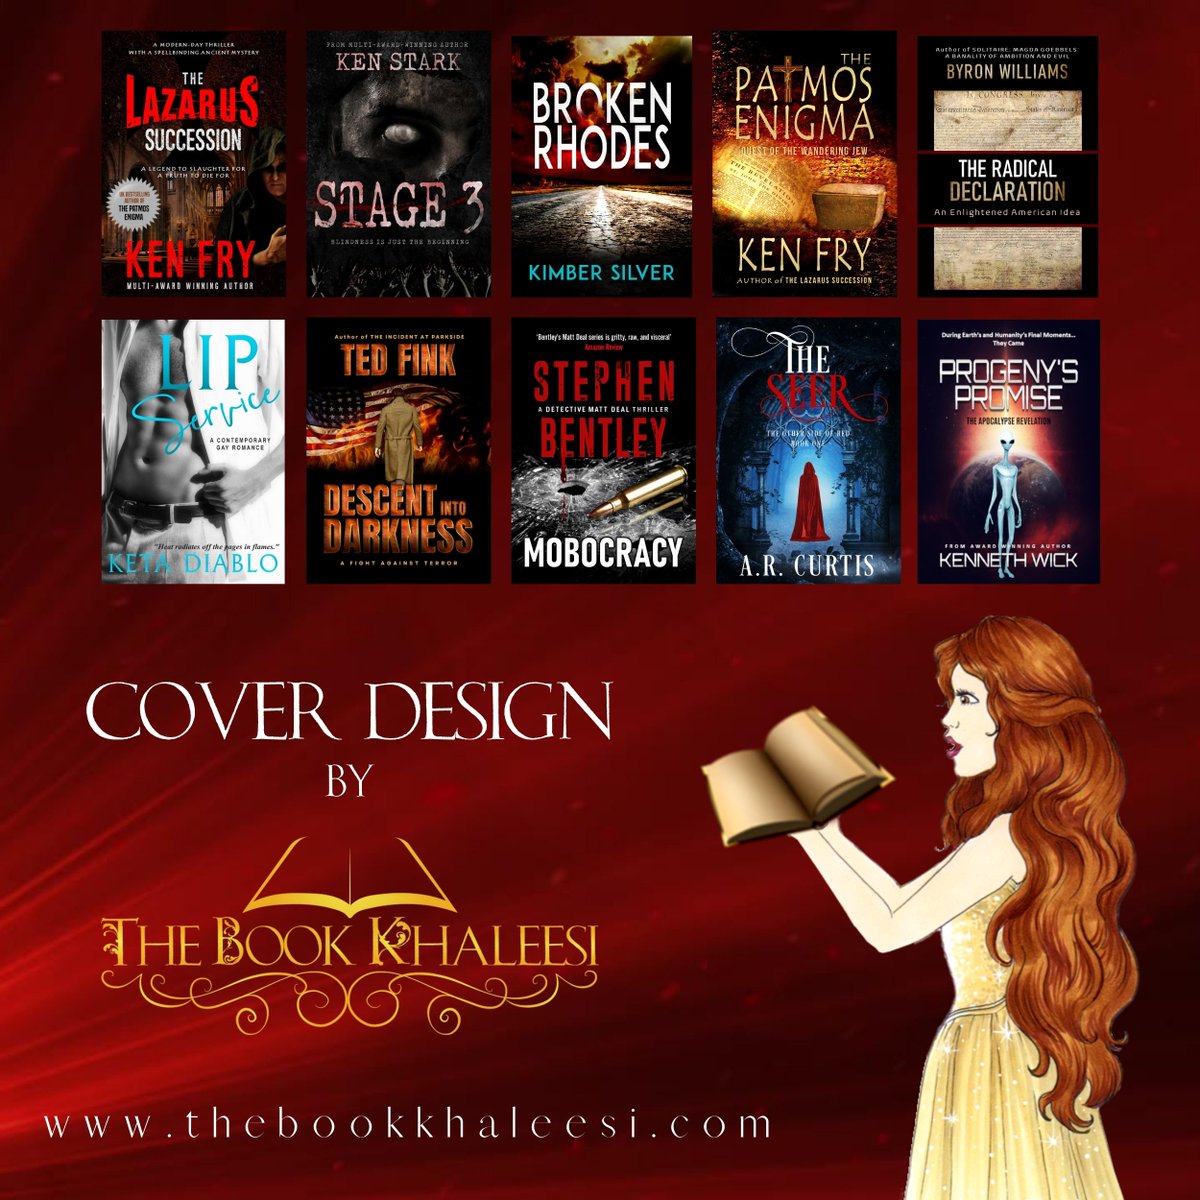 'I had dreamed of what my cover might look like for years. Eeva and her team surpassed my expectations. What a talent she has for design!' ~Kimber Silver
thebookkhaleesi.com/2016/08/custom…
Give your book a professionally designed cover.

#coverdesign #bookcover #coverdesigner
#authors